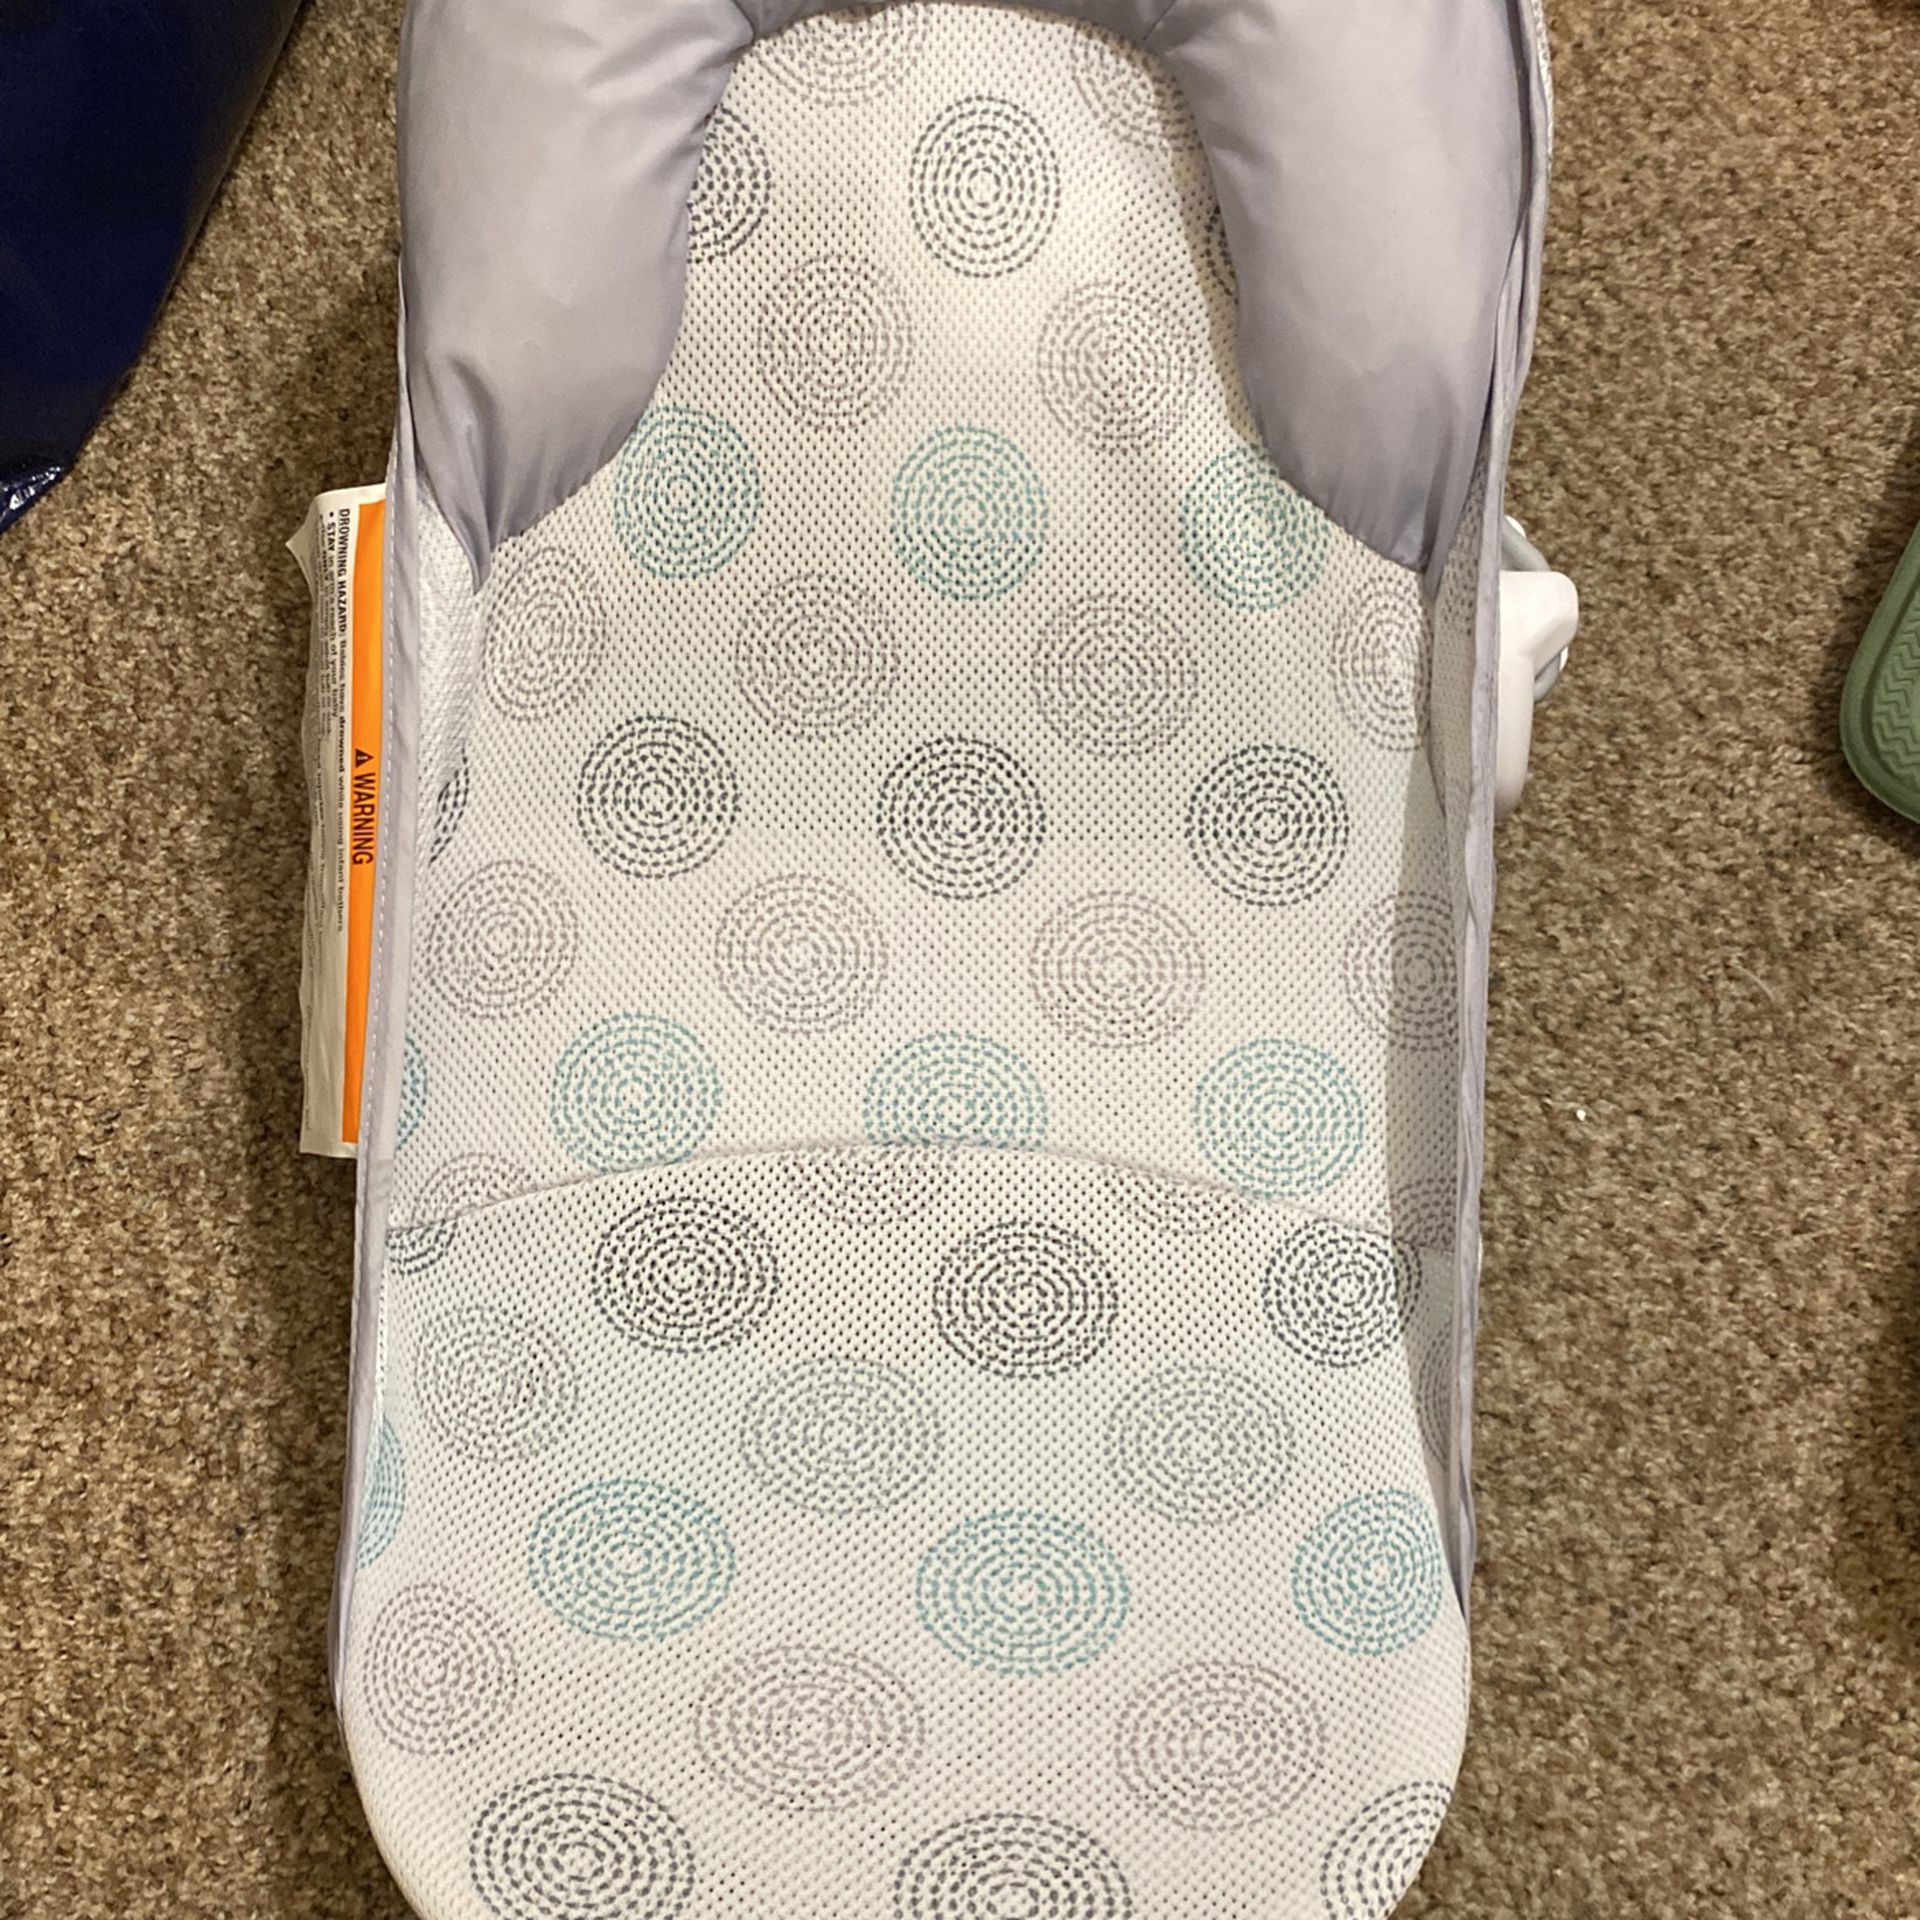 Collapsible Baby Bath